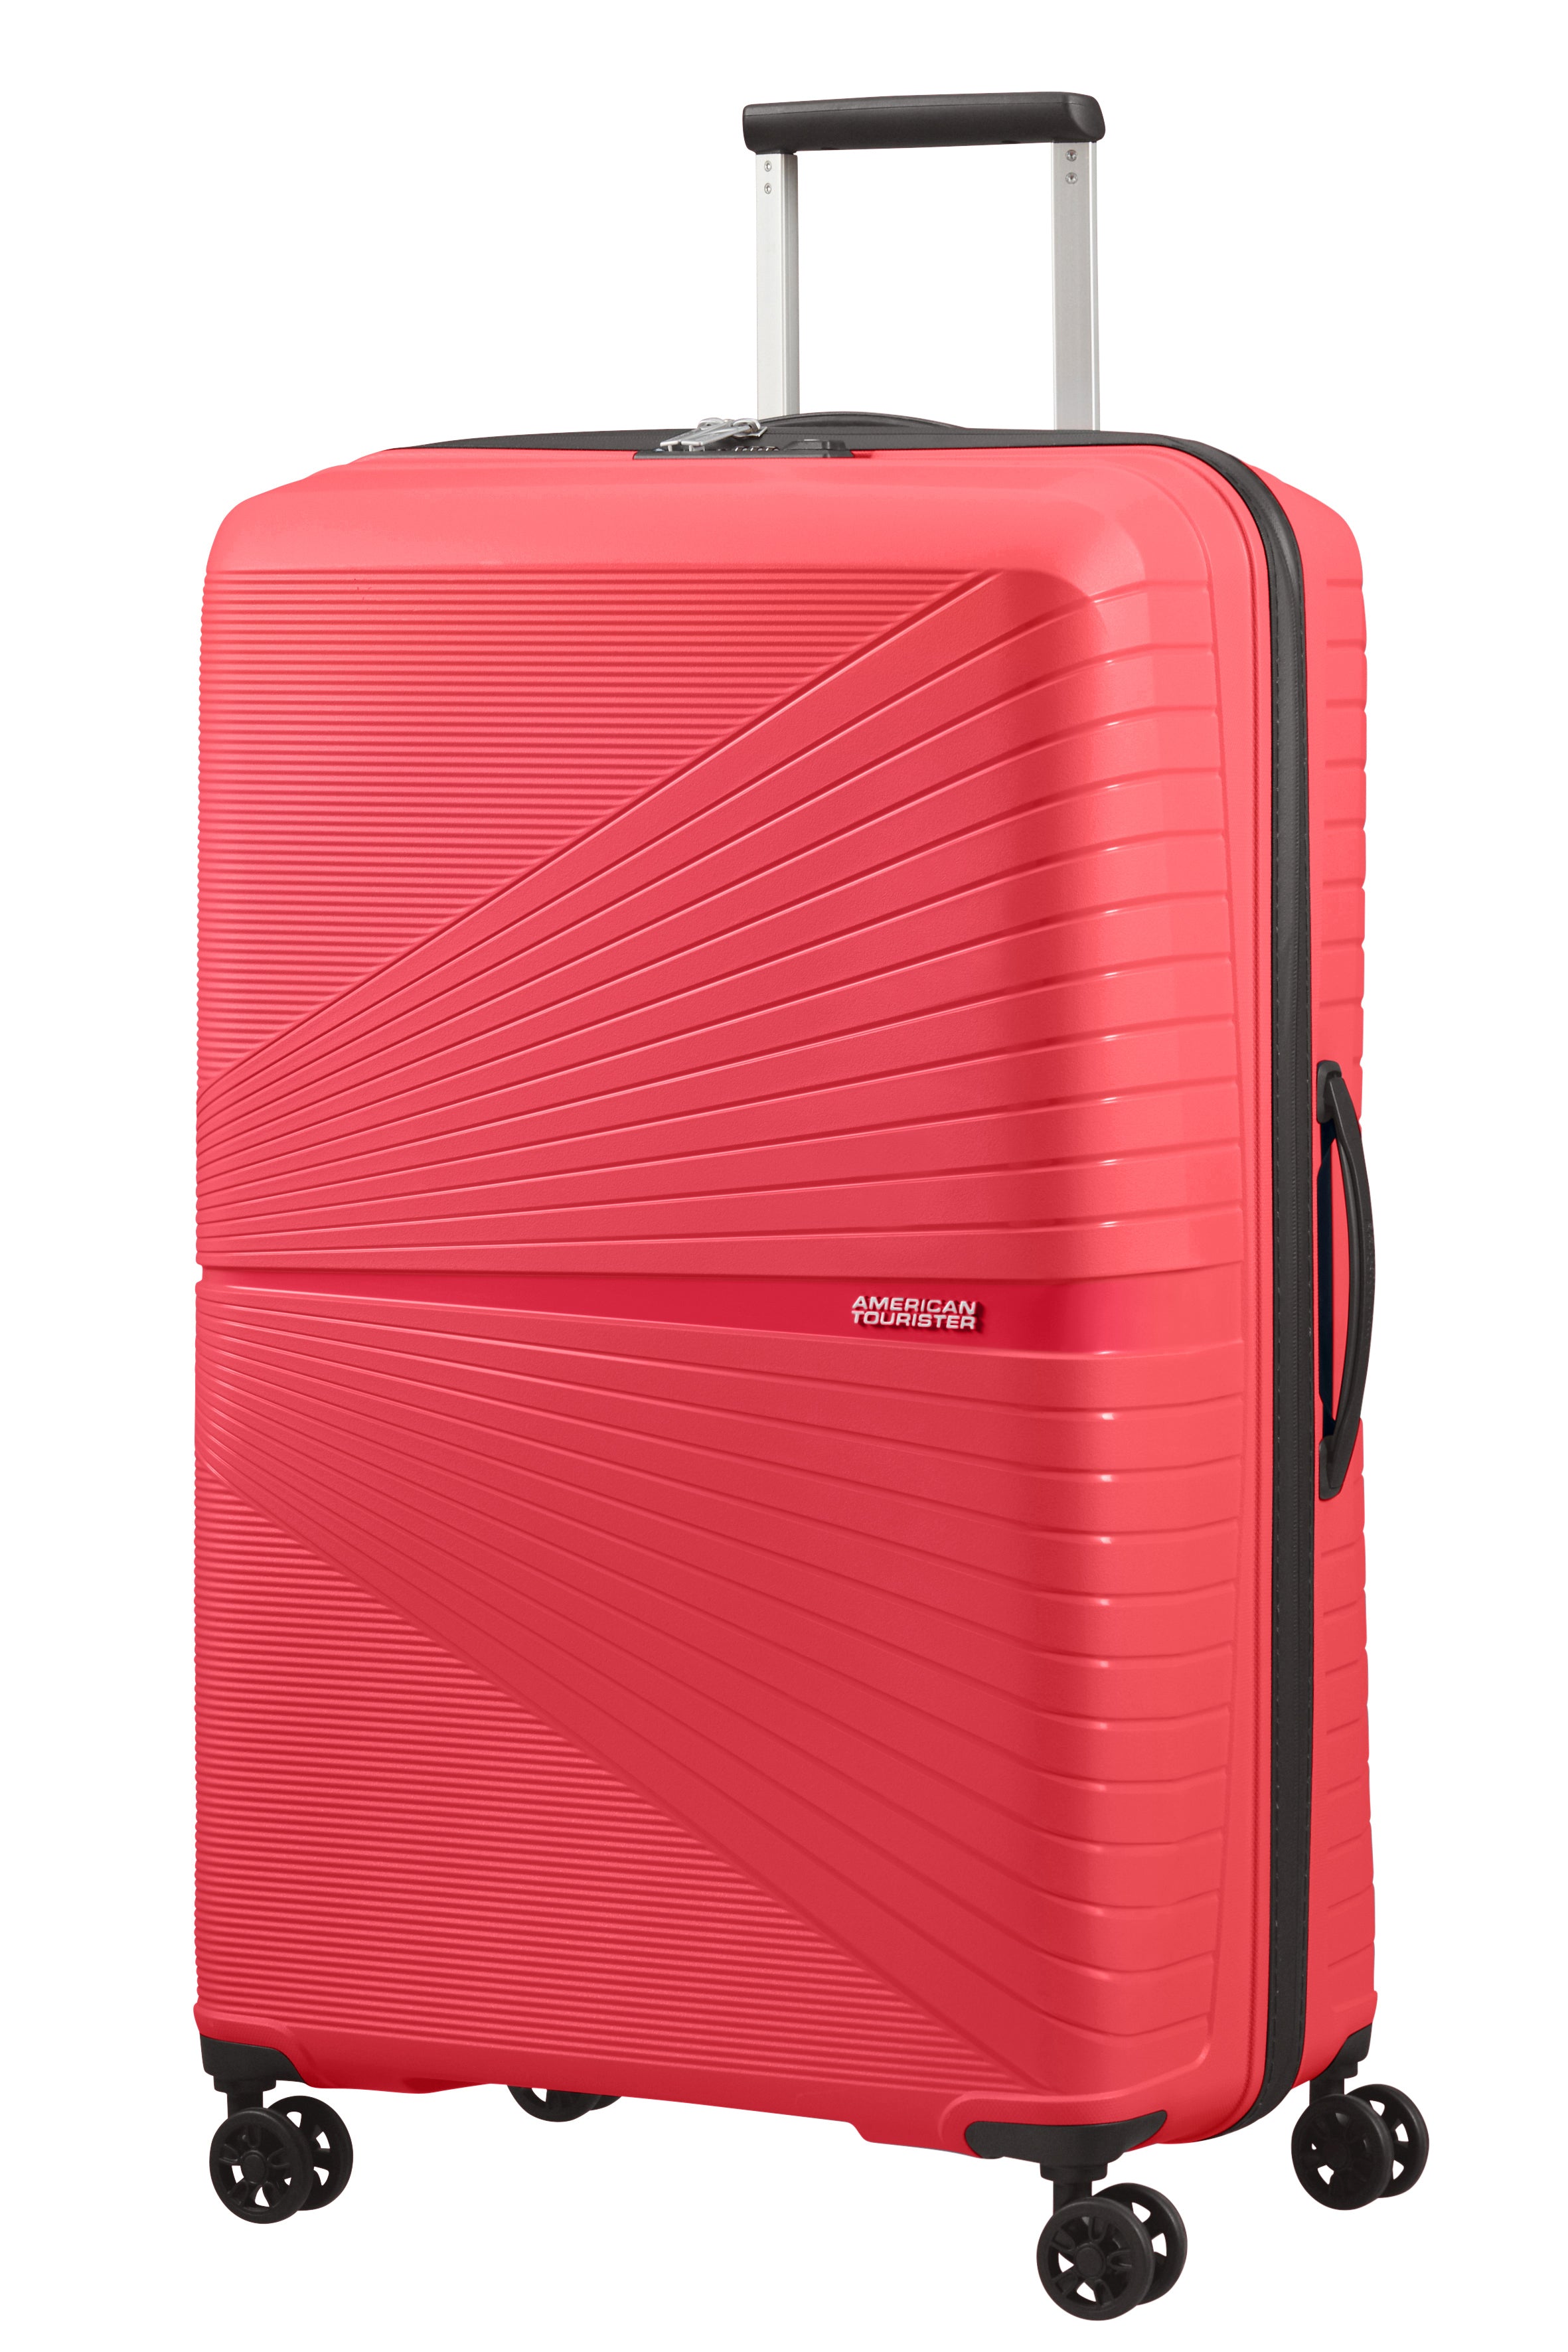 American Tourister - Airconic 77cm Large 4 Wheel Hard Suitcase - Paradise  Pink | Bags To Go